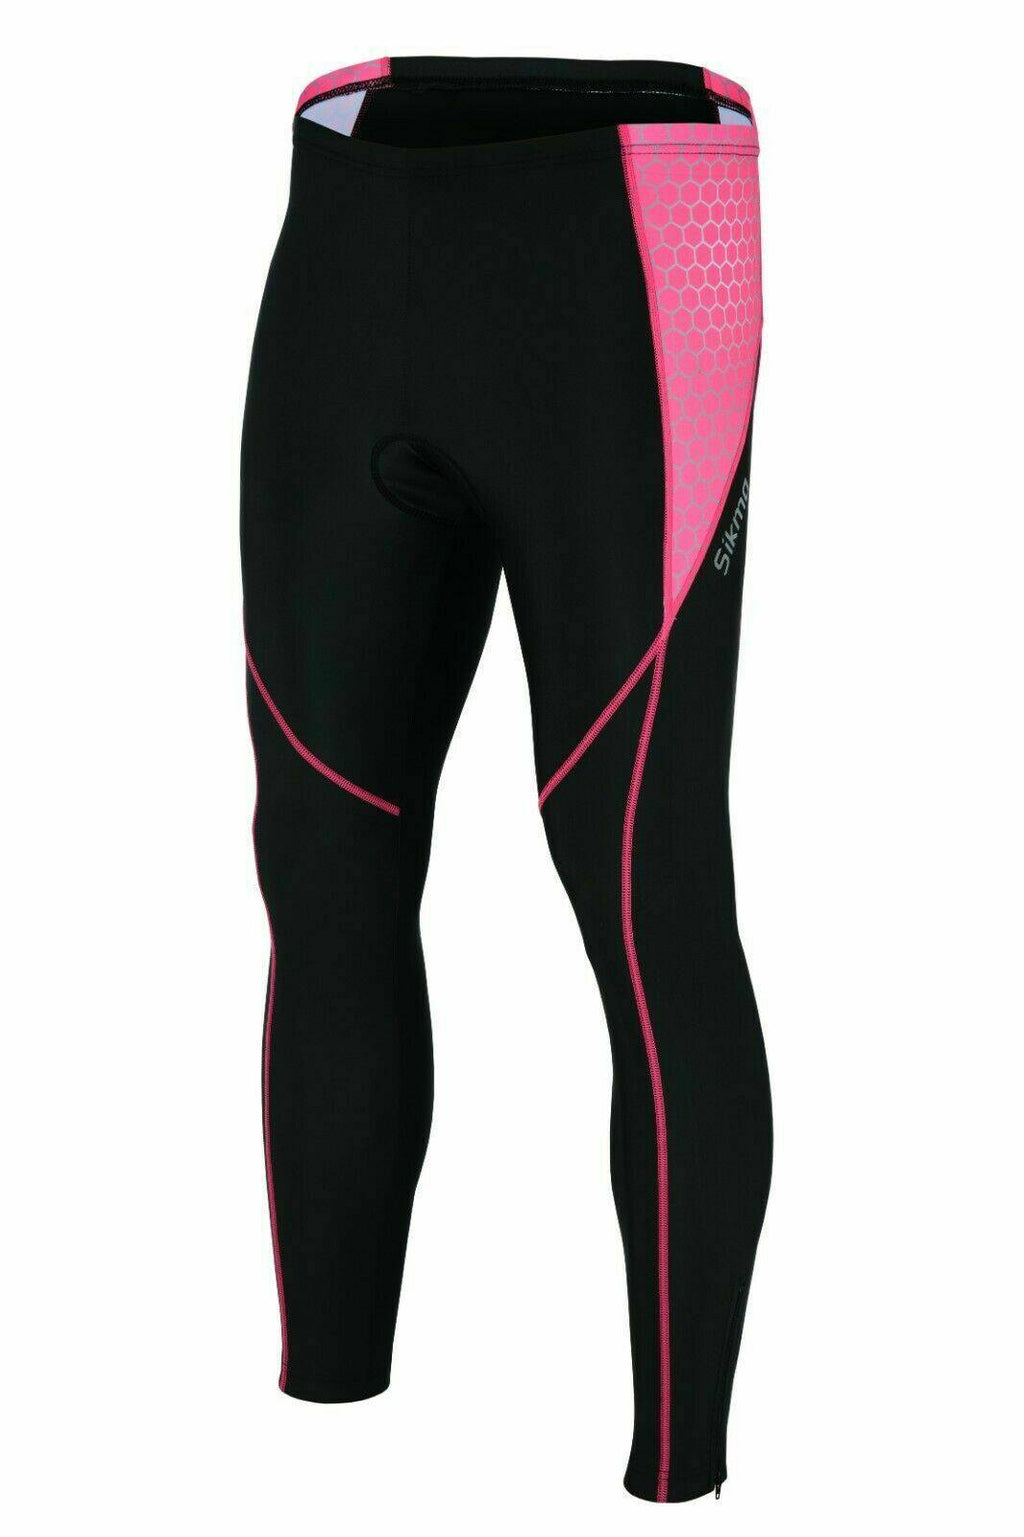 Women's Cycling 3D GEL Padded Tights